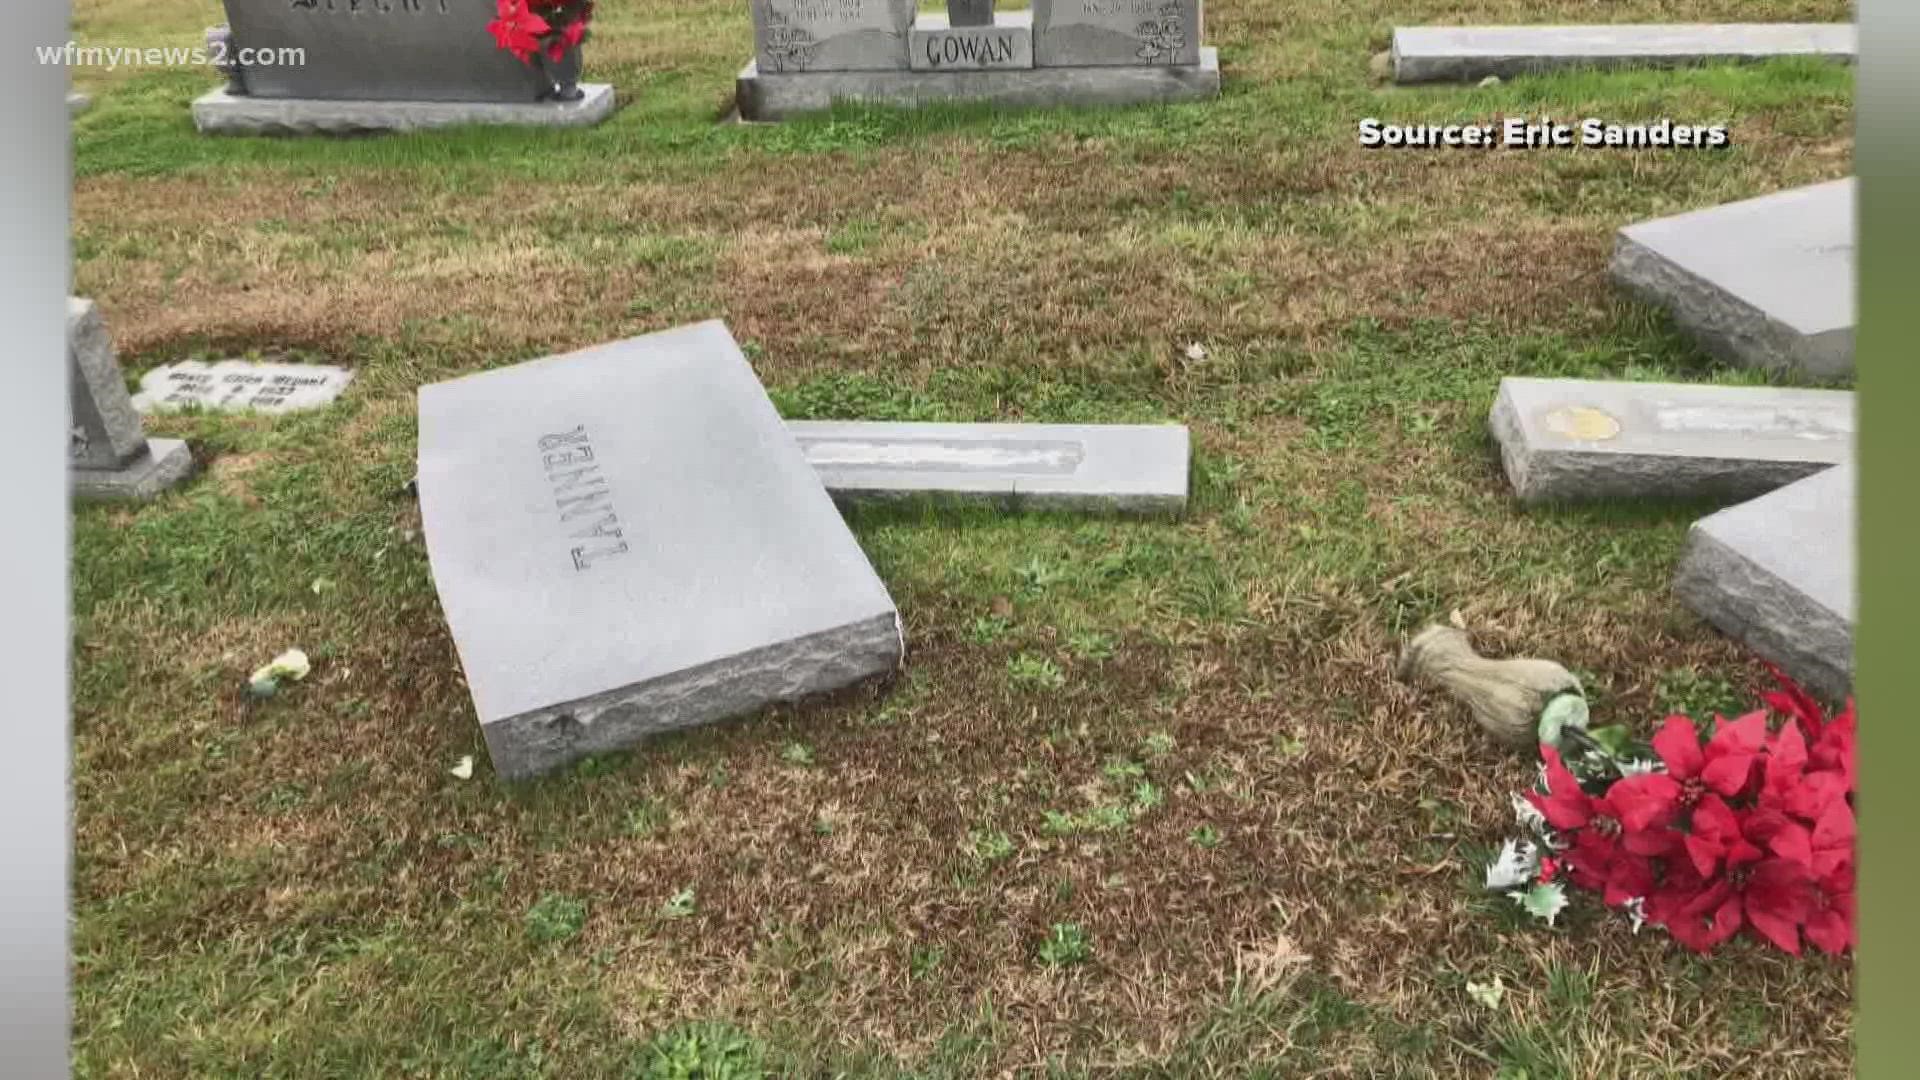 The headstones at Oaklawn Cemetery were found knocked over on New Year's Day.